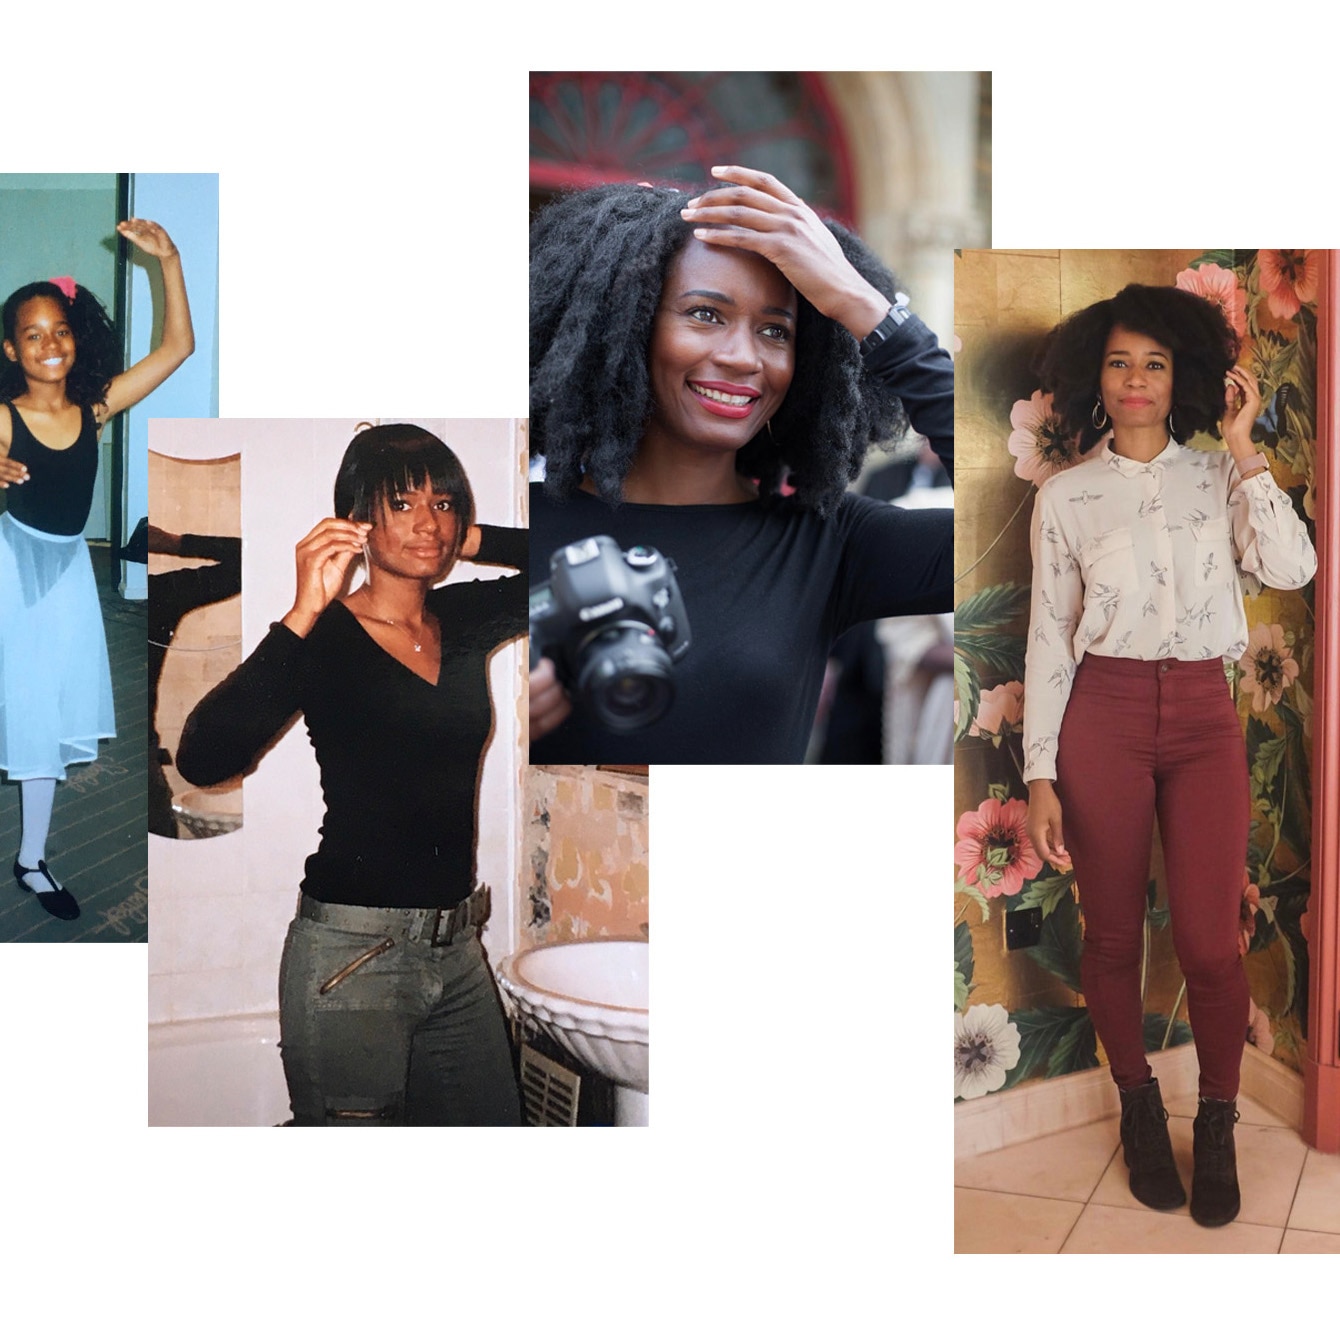 Dove Four Black Women on Style, Identity and Standing Out